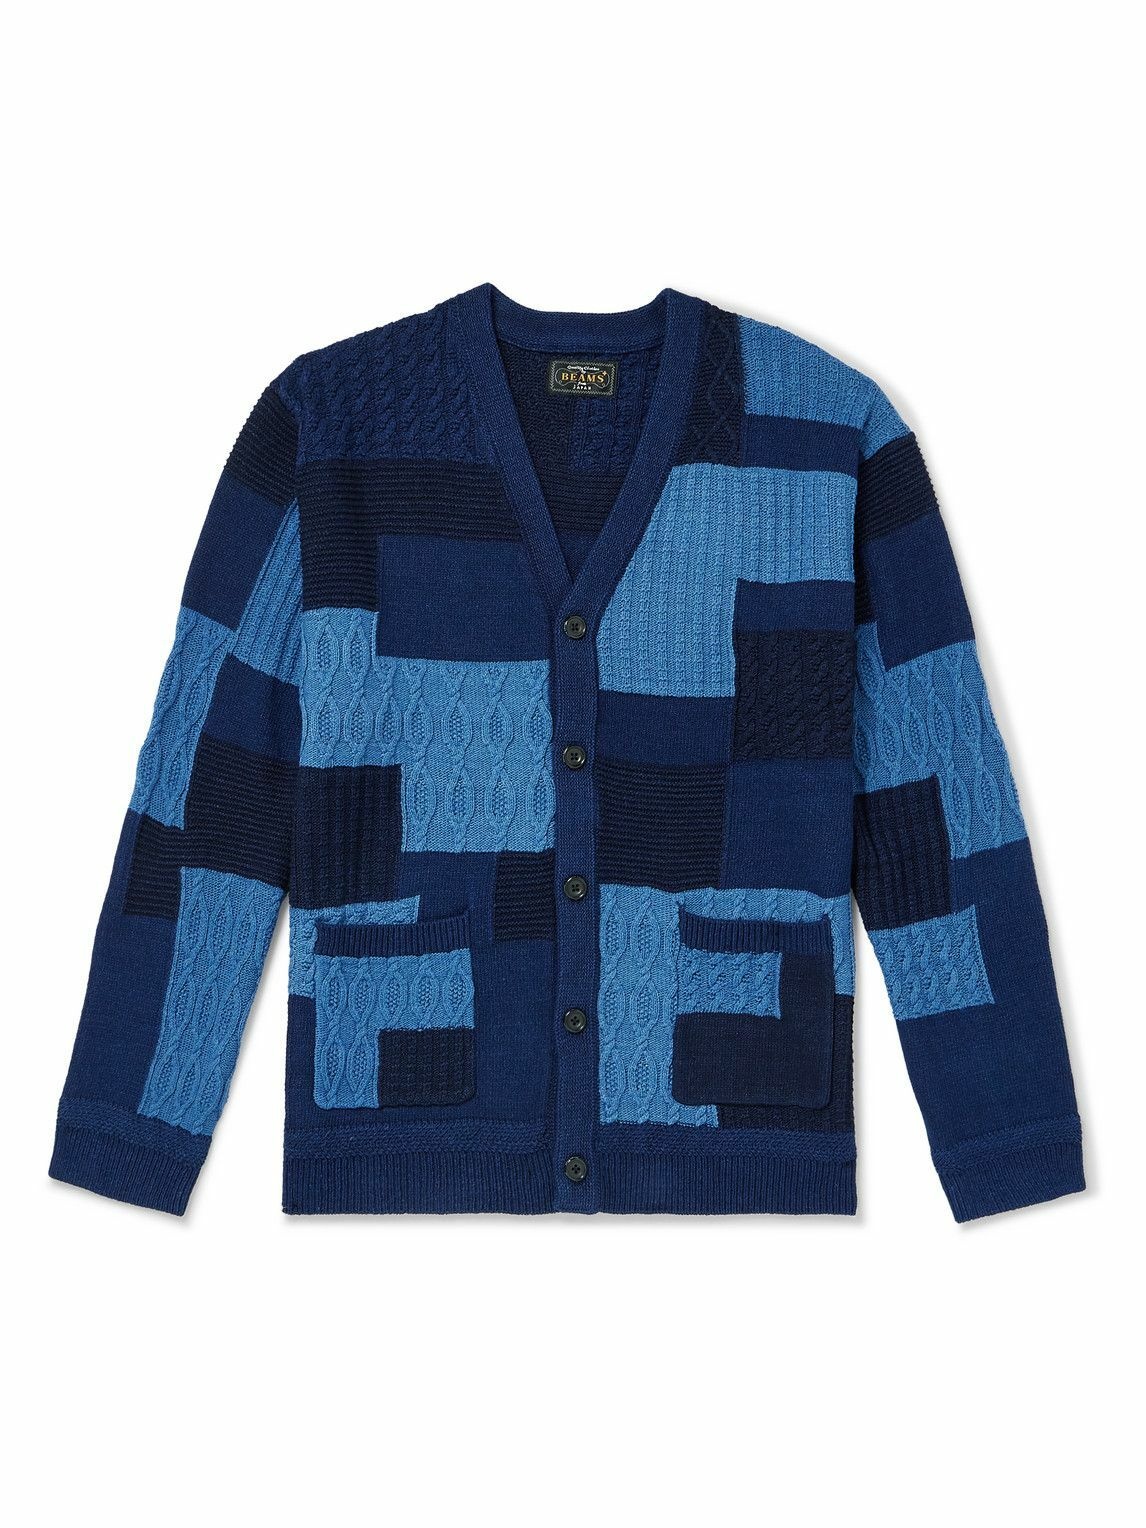 Beams Plus - Patchwork Knitted Cotton Cardigan - Blue Beams Plus